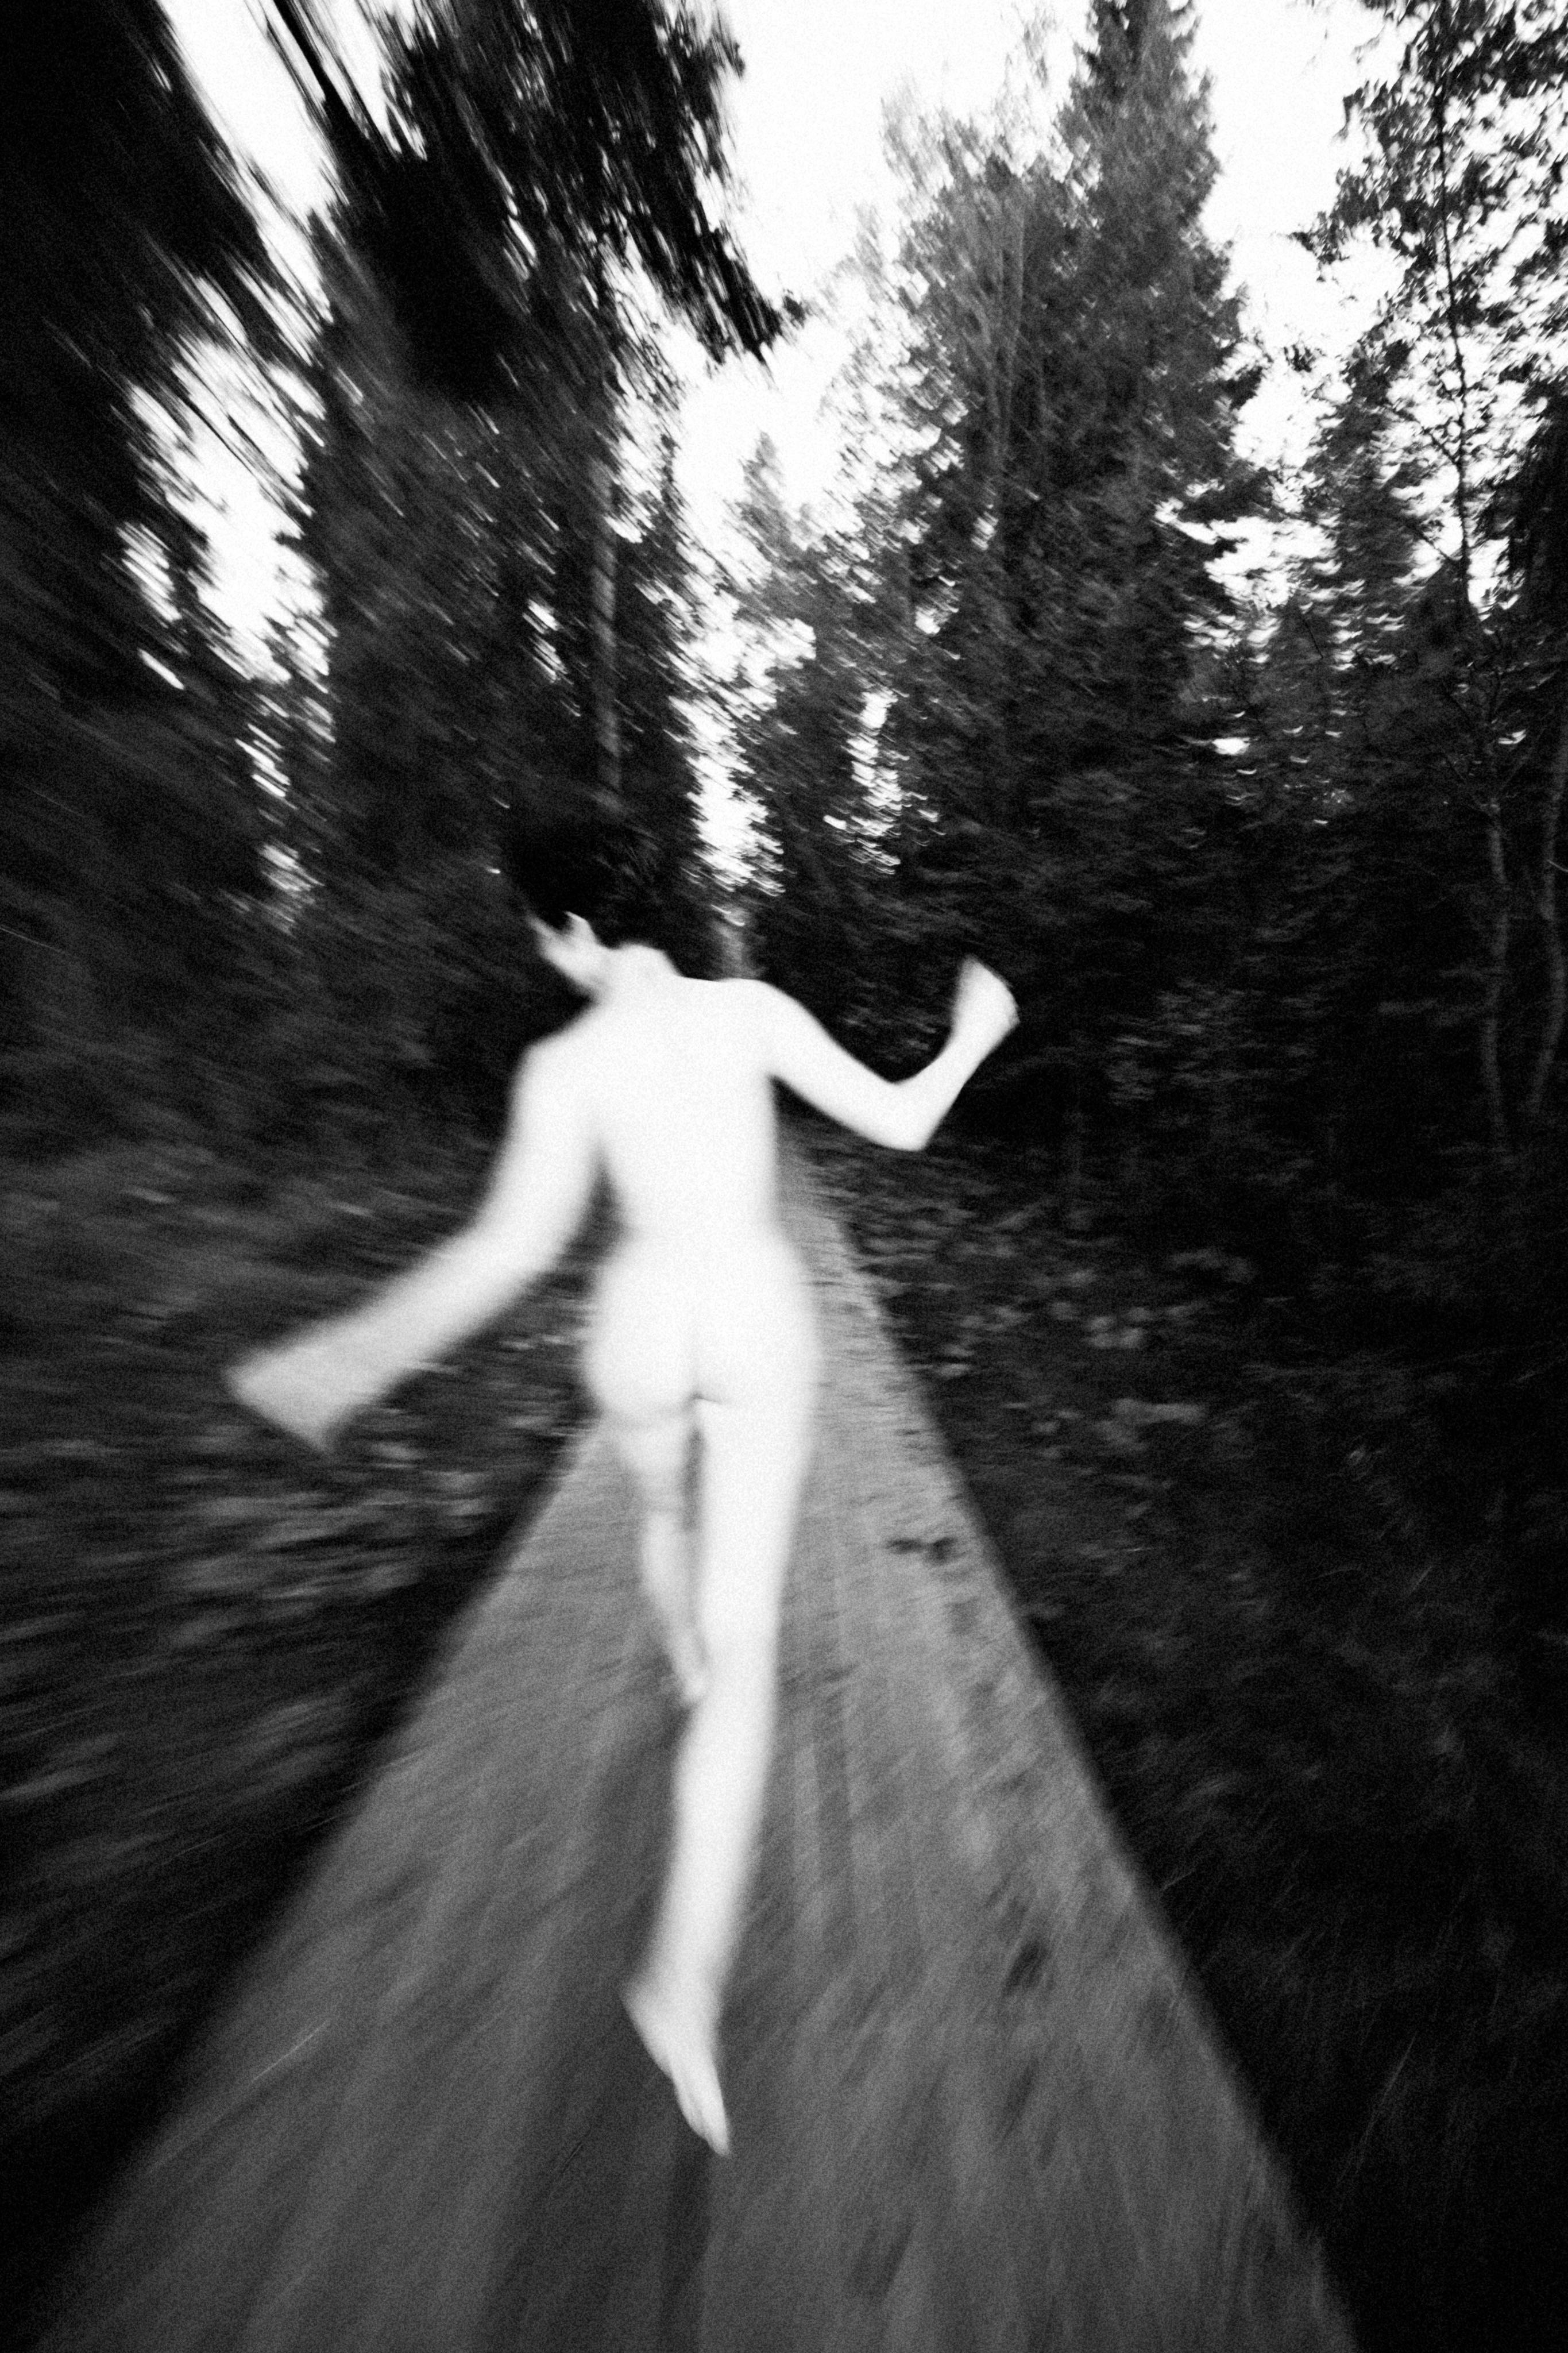 naked person running in the forest